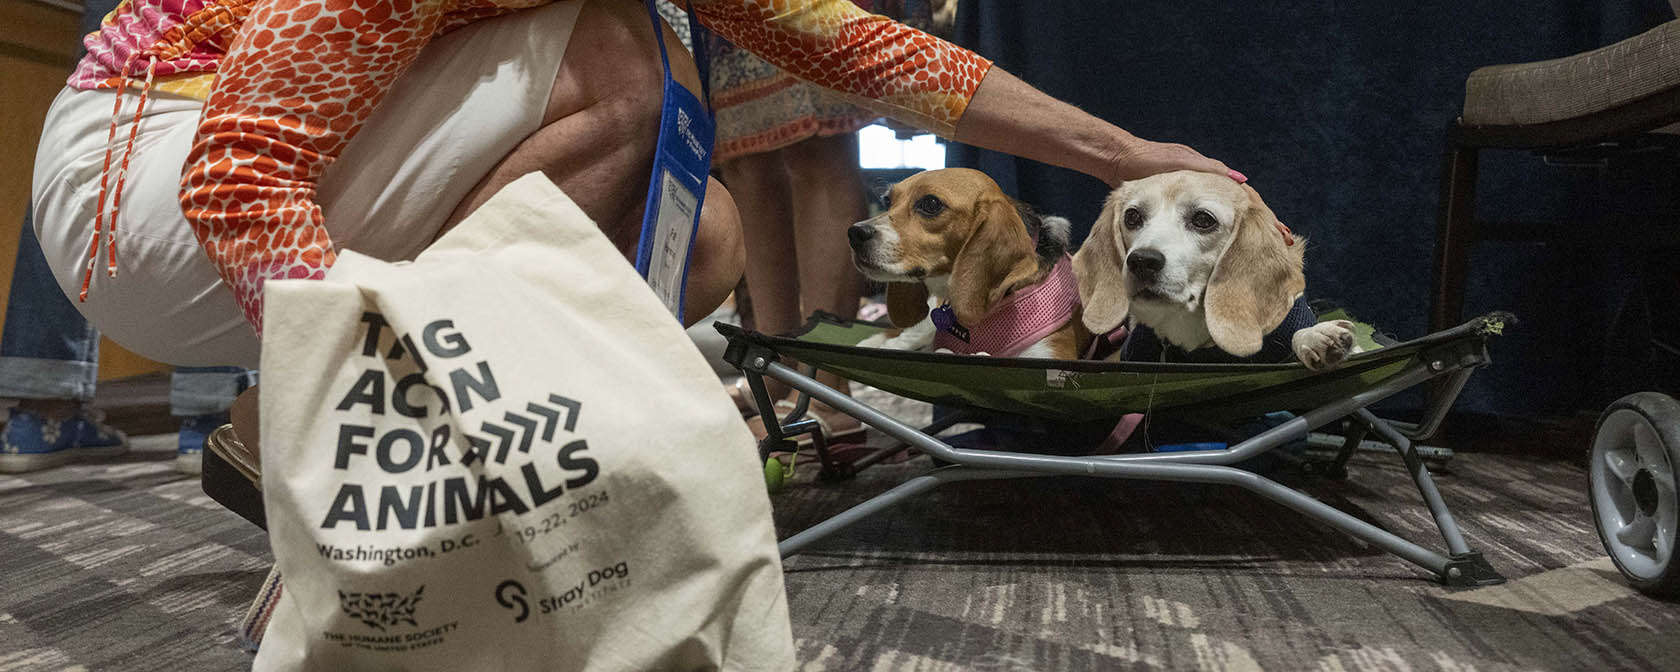 Solidarity at D.C. animal advocacy conference shows the power of our cause